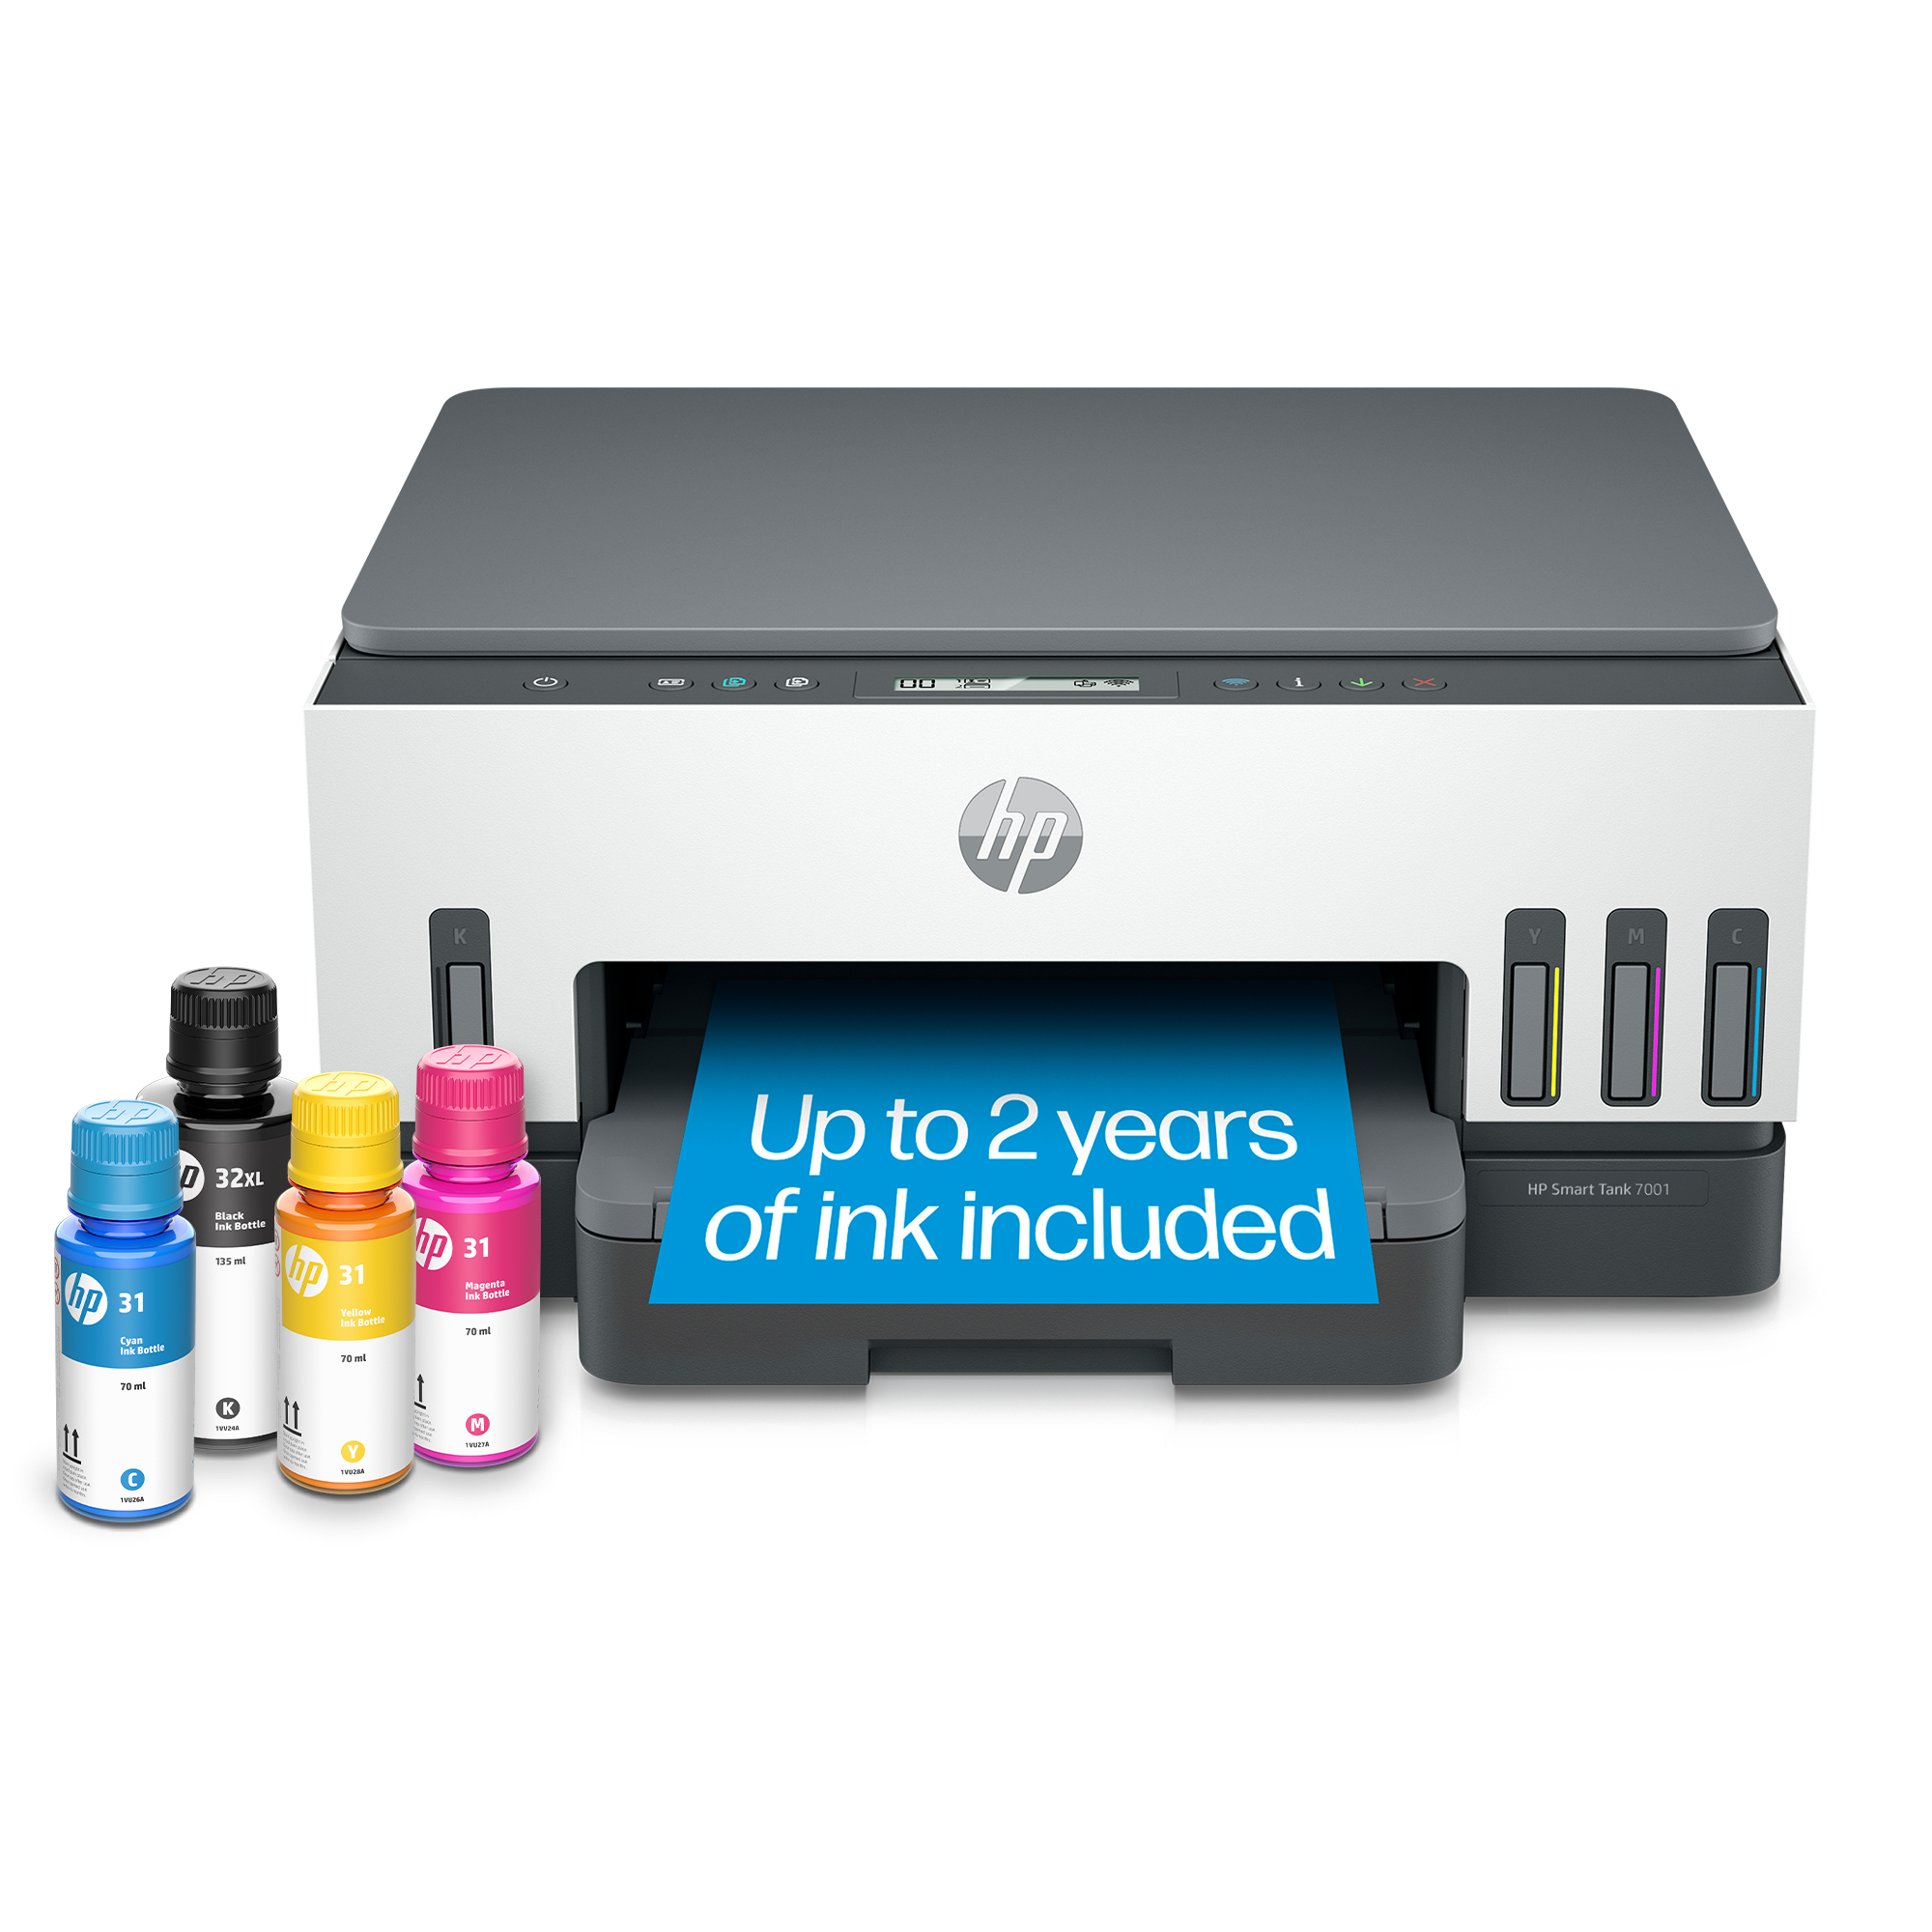 Polair overzien Bergbeklimmer HP Smart Tank 7001 Wireless All-in-One Cartridge-free Color Ink Tank Printer,  up to 2 Years of Ink Included - Walmart.com